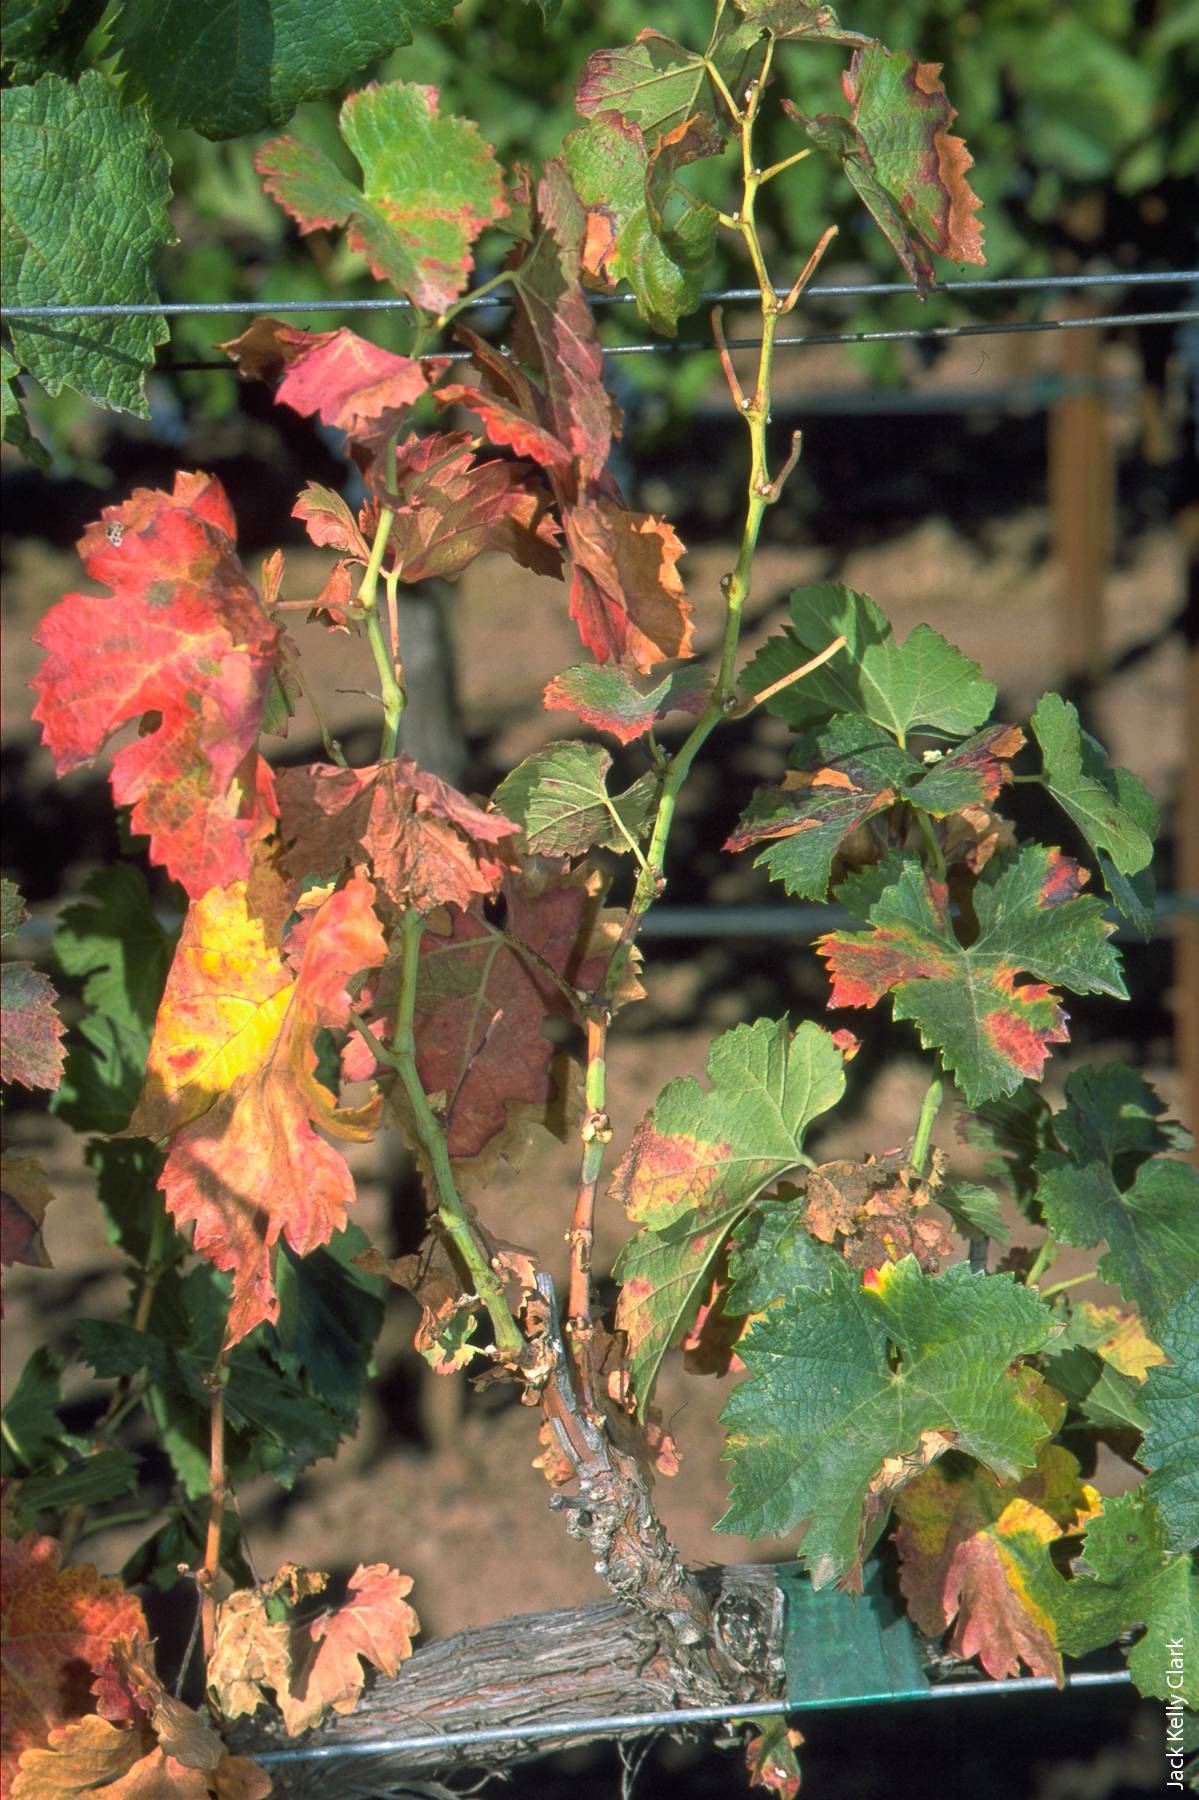 PD symptoms on a red grape variety, showing progressive foliage discoloration, irregular bark maturity and petioles without leaf blades. The Temecula Valley PD outbreak in 1999 triggered an emergency response to save the wine and grape industries.